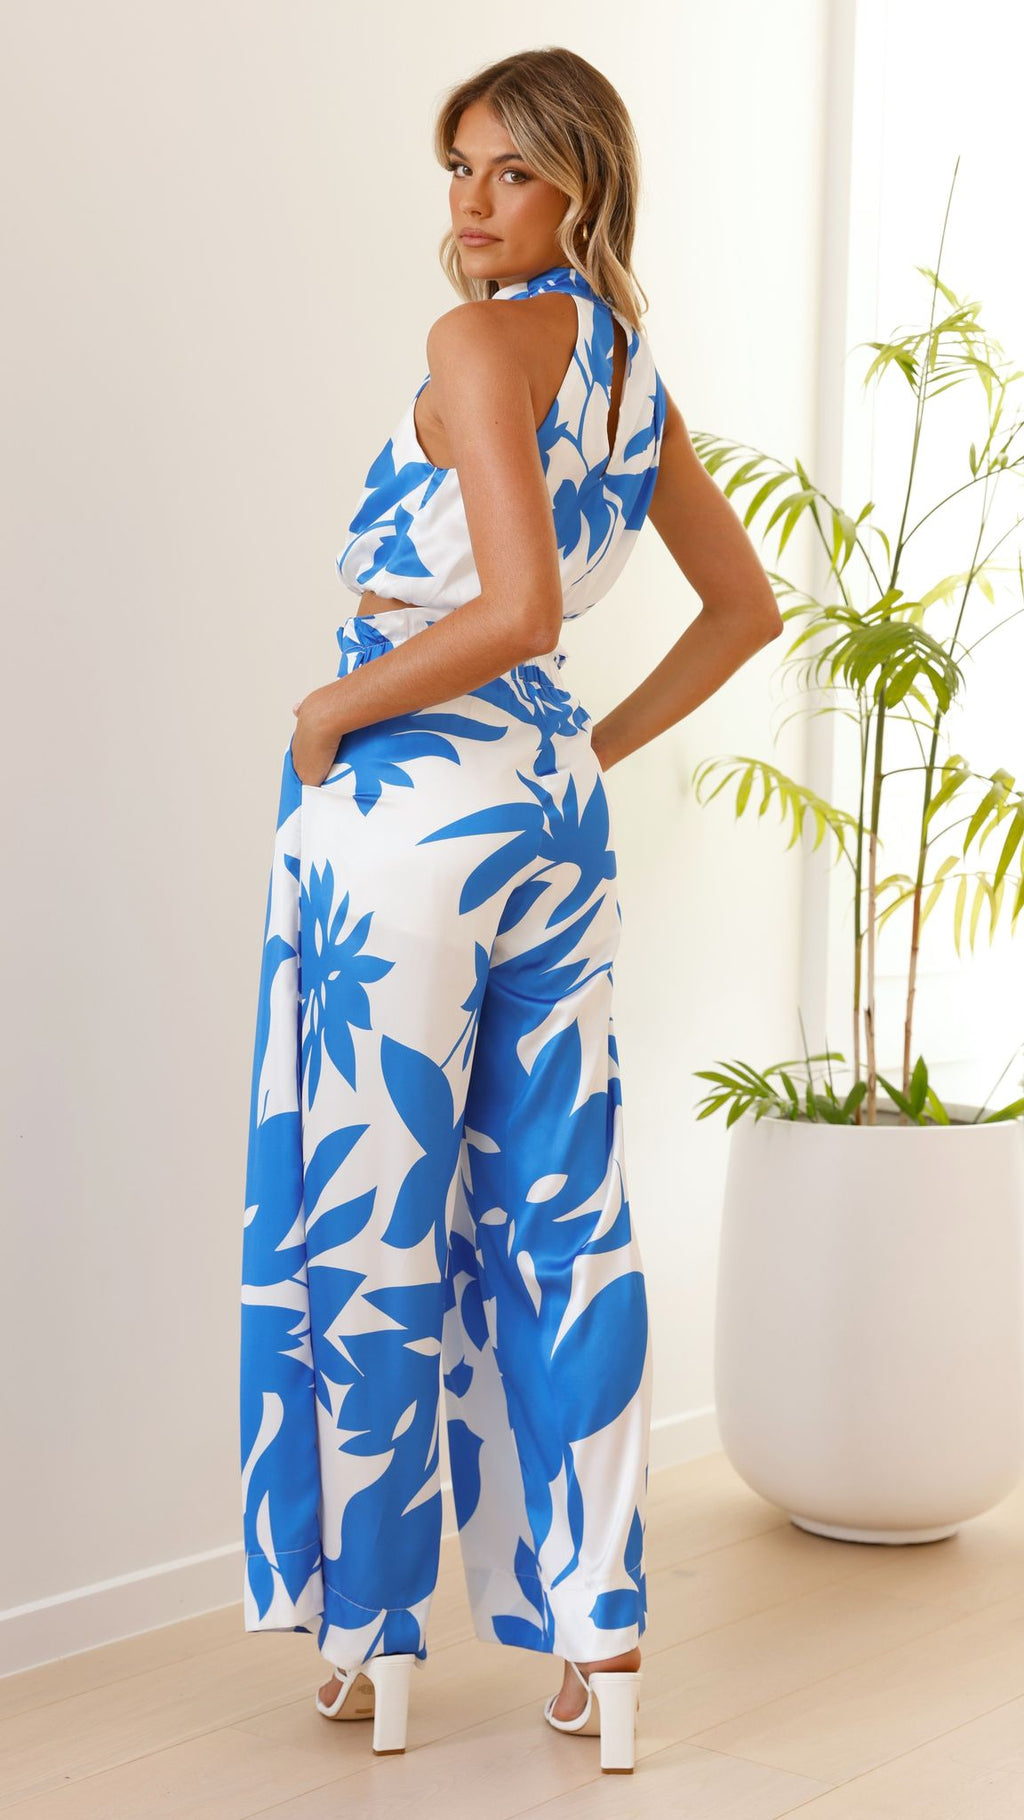 Stella Pants and Top Set - Blue/White Floral